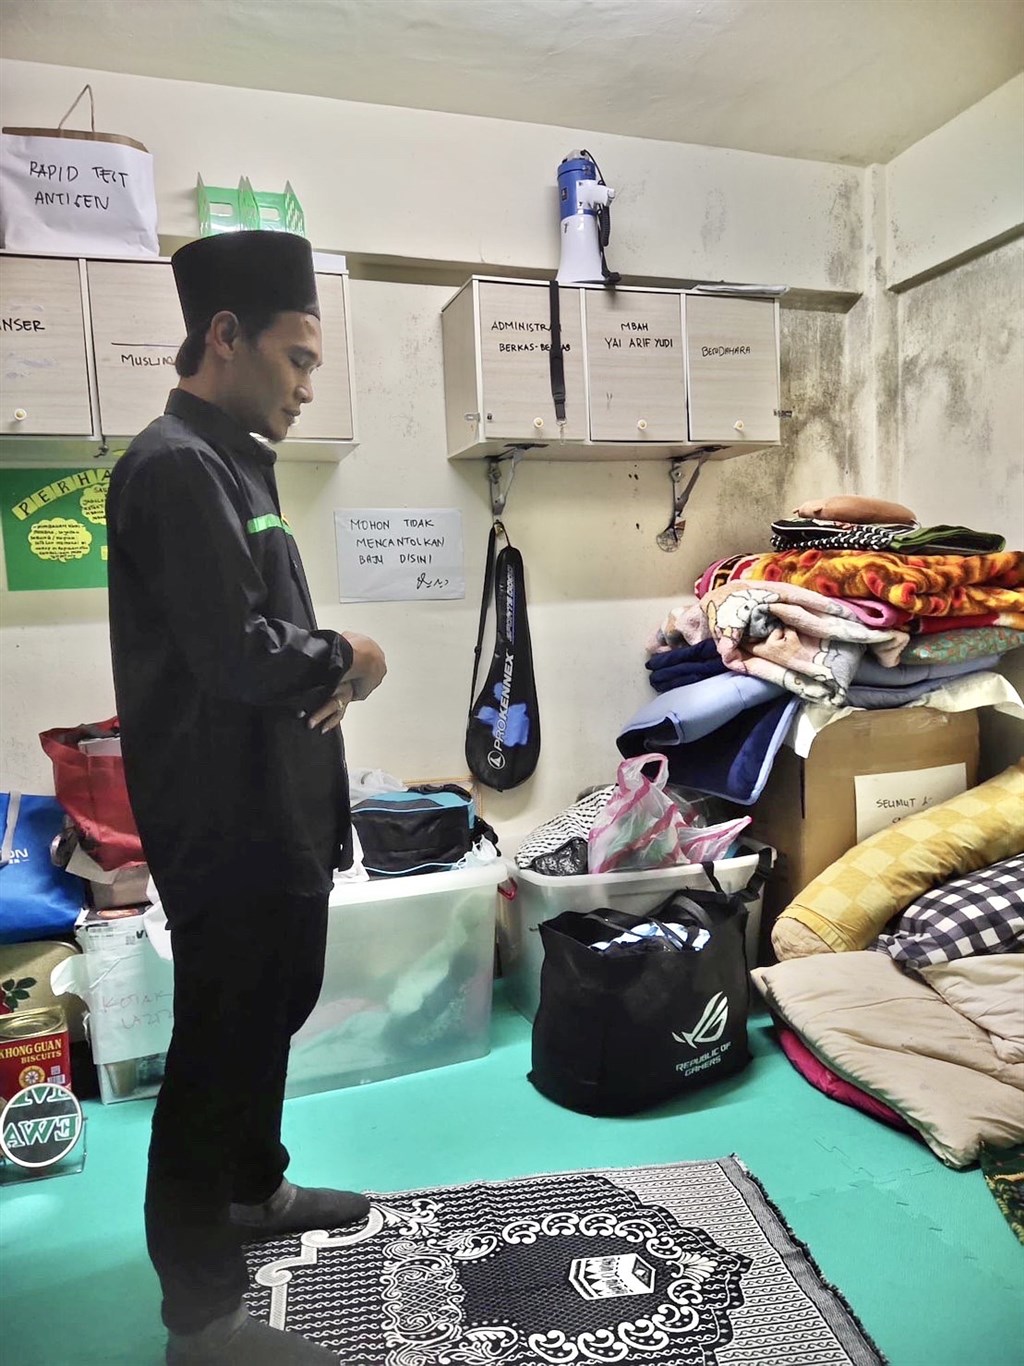 Indonesian migrant worker Nur Hasanudin conducts his prayers at a factory office during weekdays. Photo courtesy of Nur Hasanudin